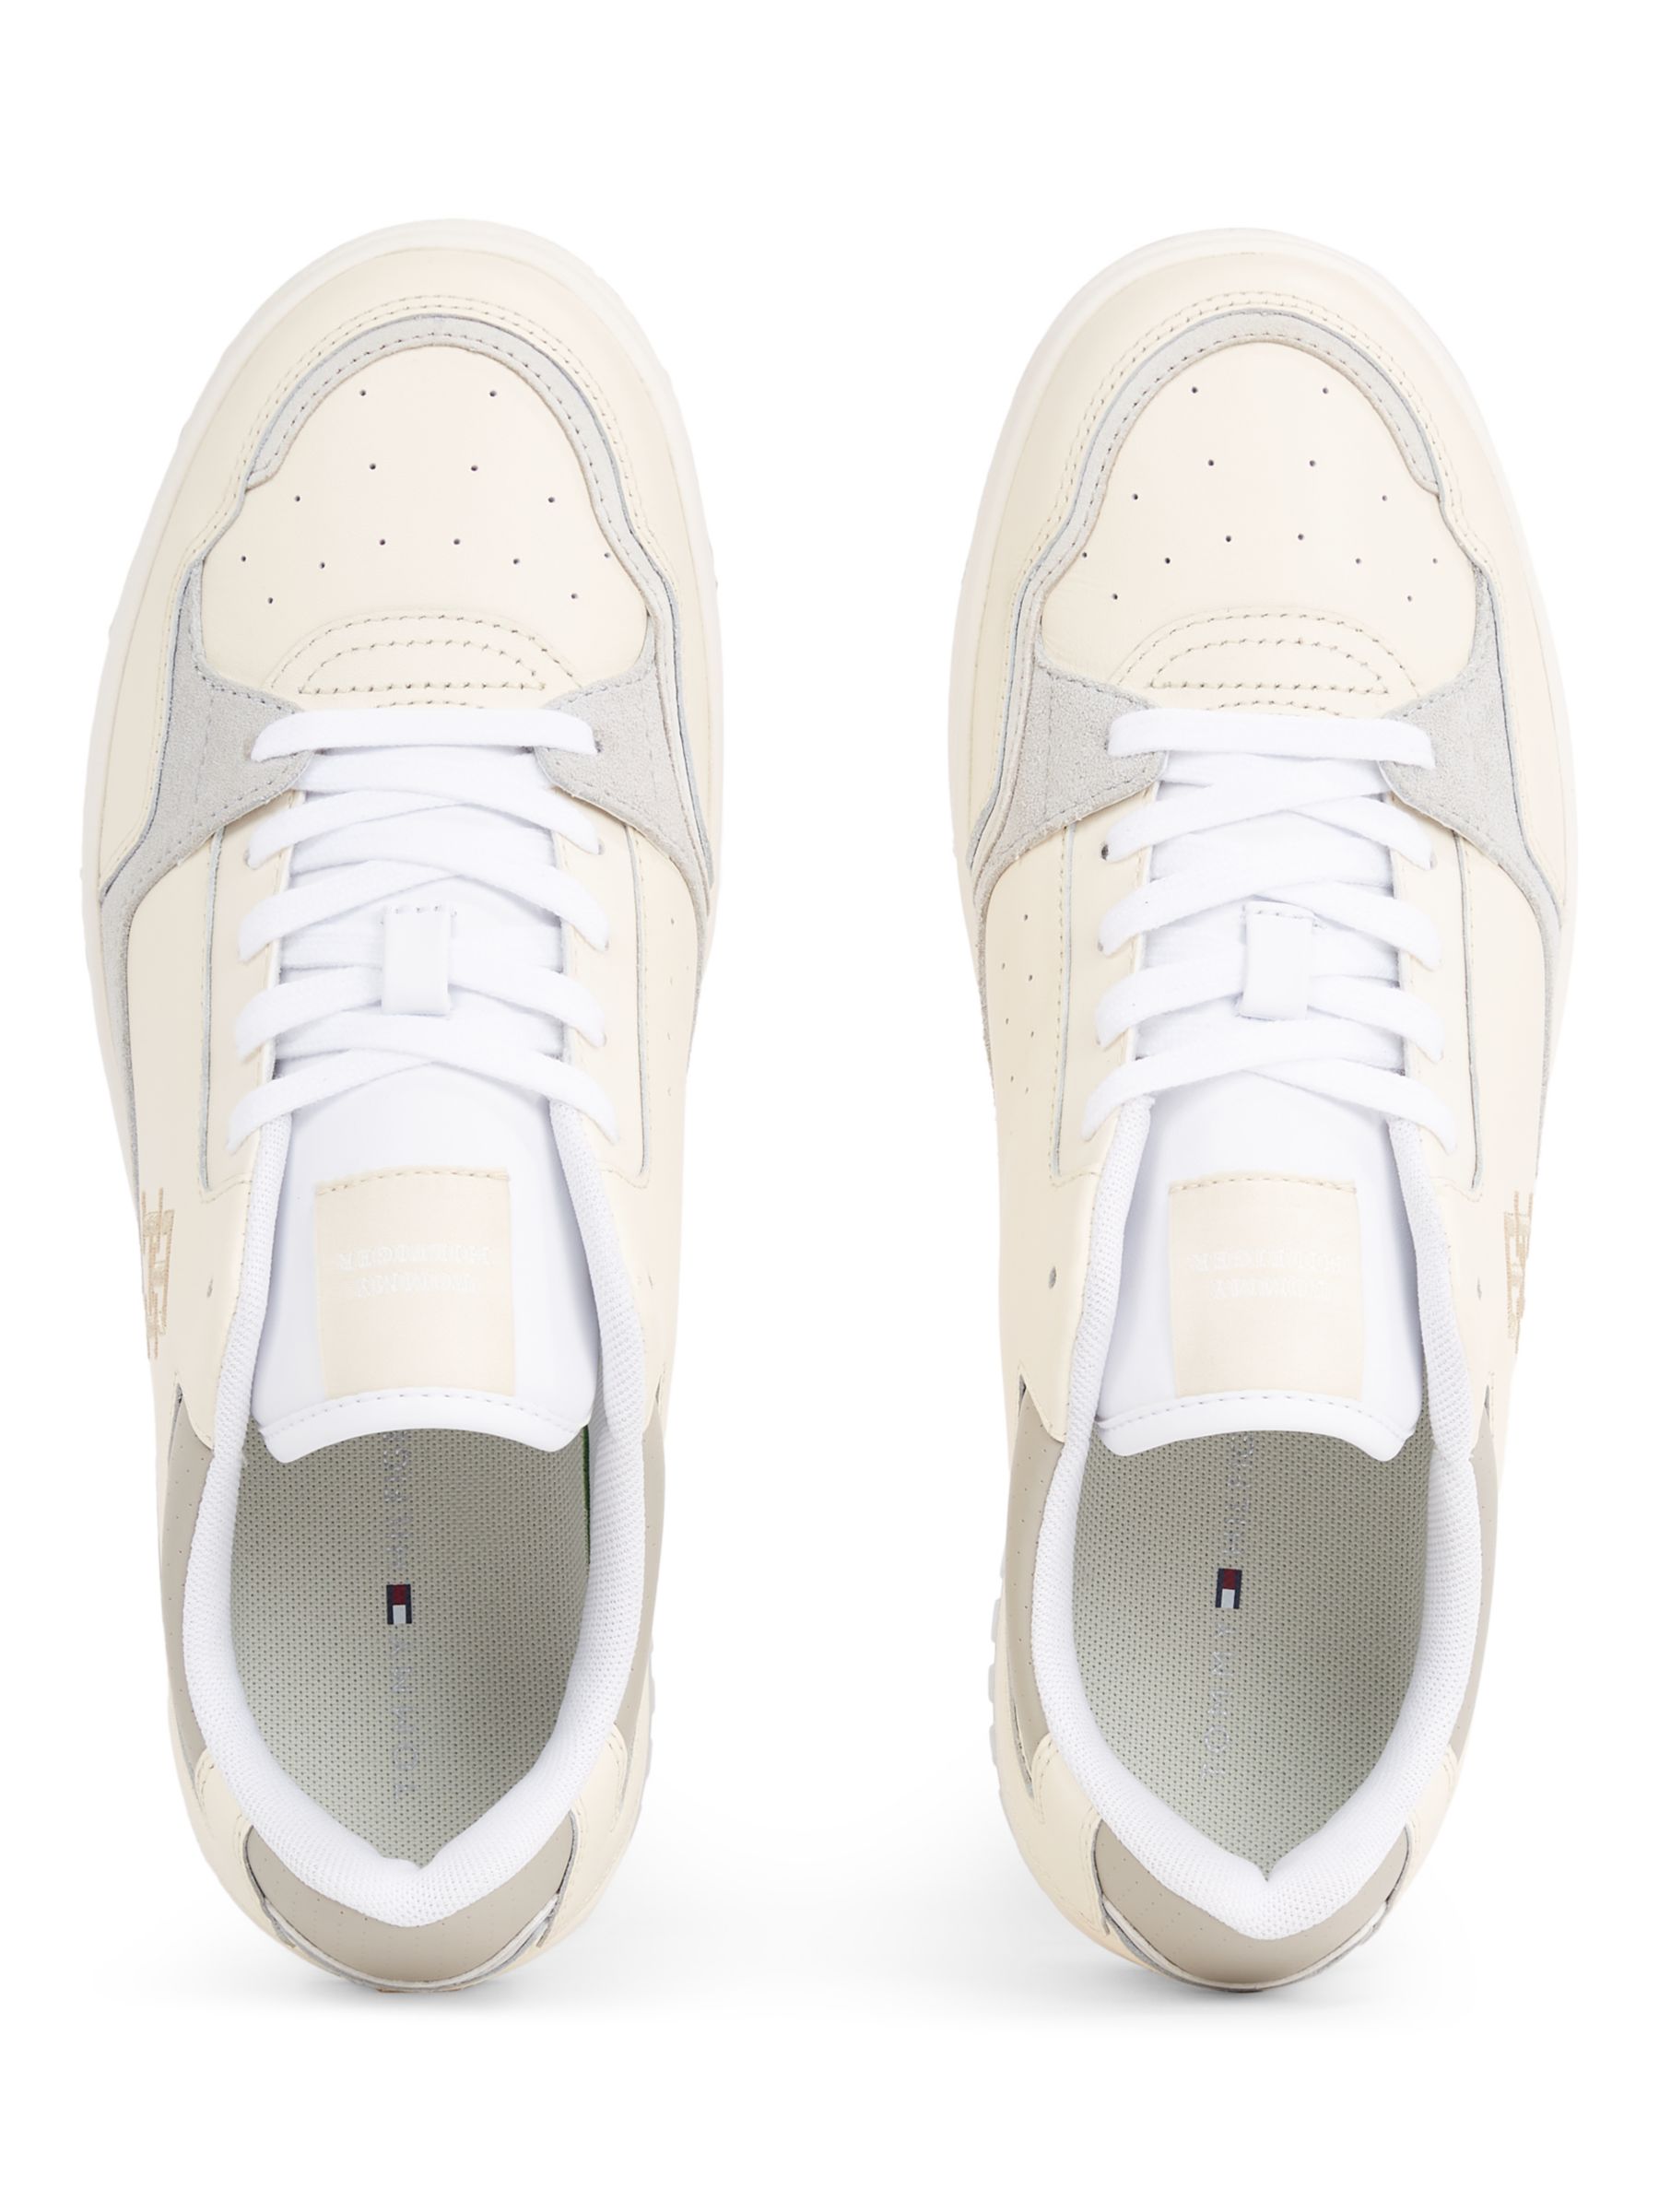 Buy Tommy Hilfiger Leather Street Trainers, Calico Online at johnlewis.com